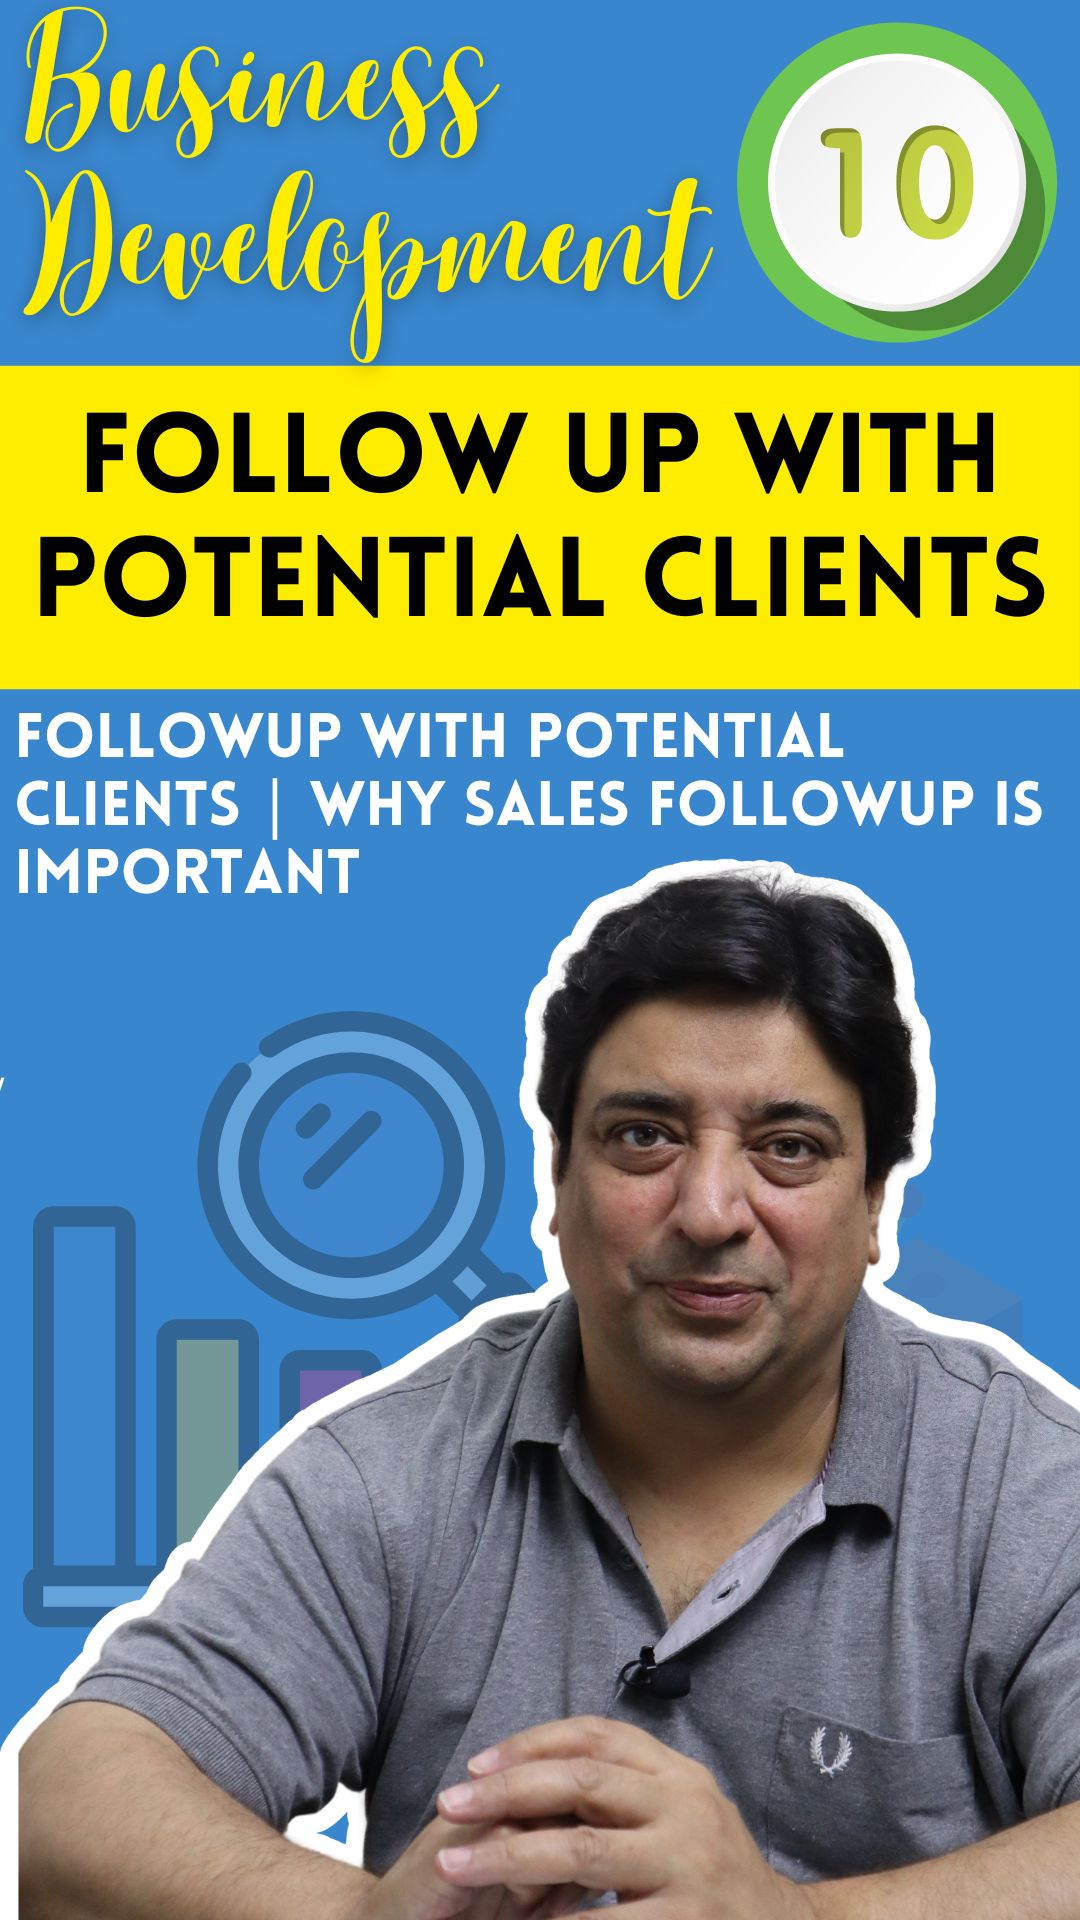 Why sales follow-up is important| follow up with potential clients: